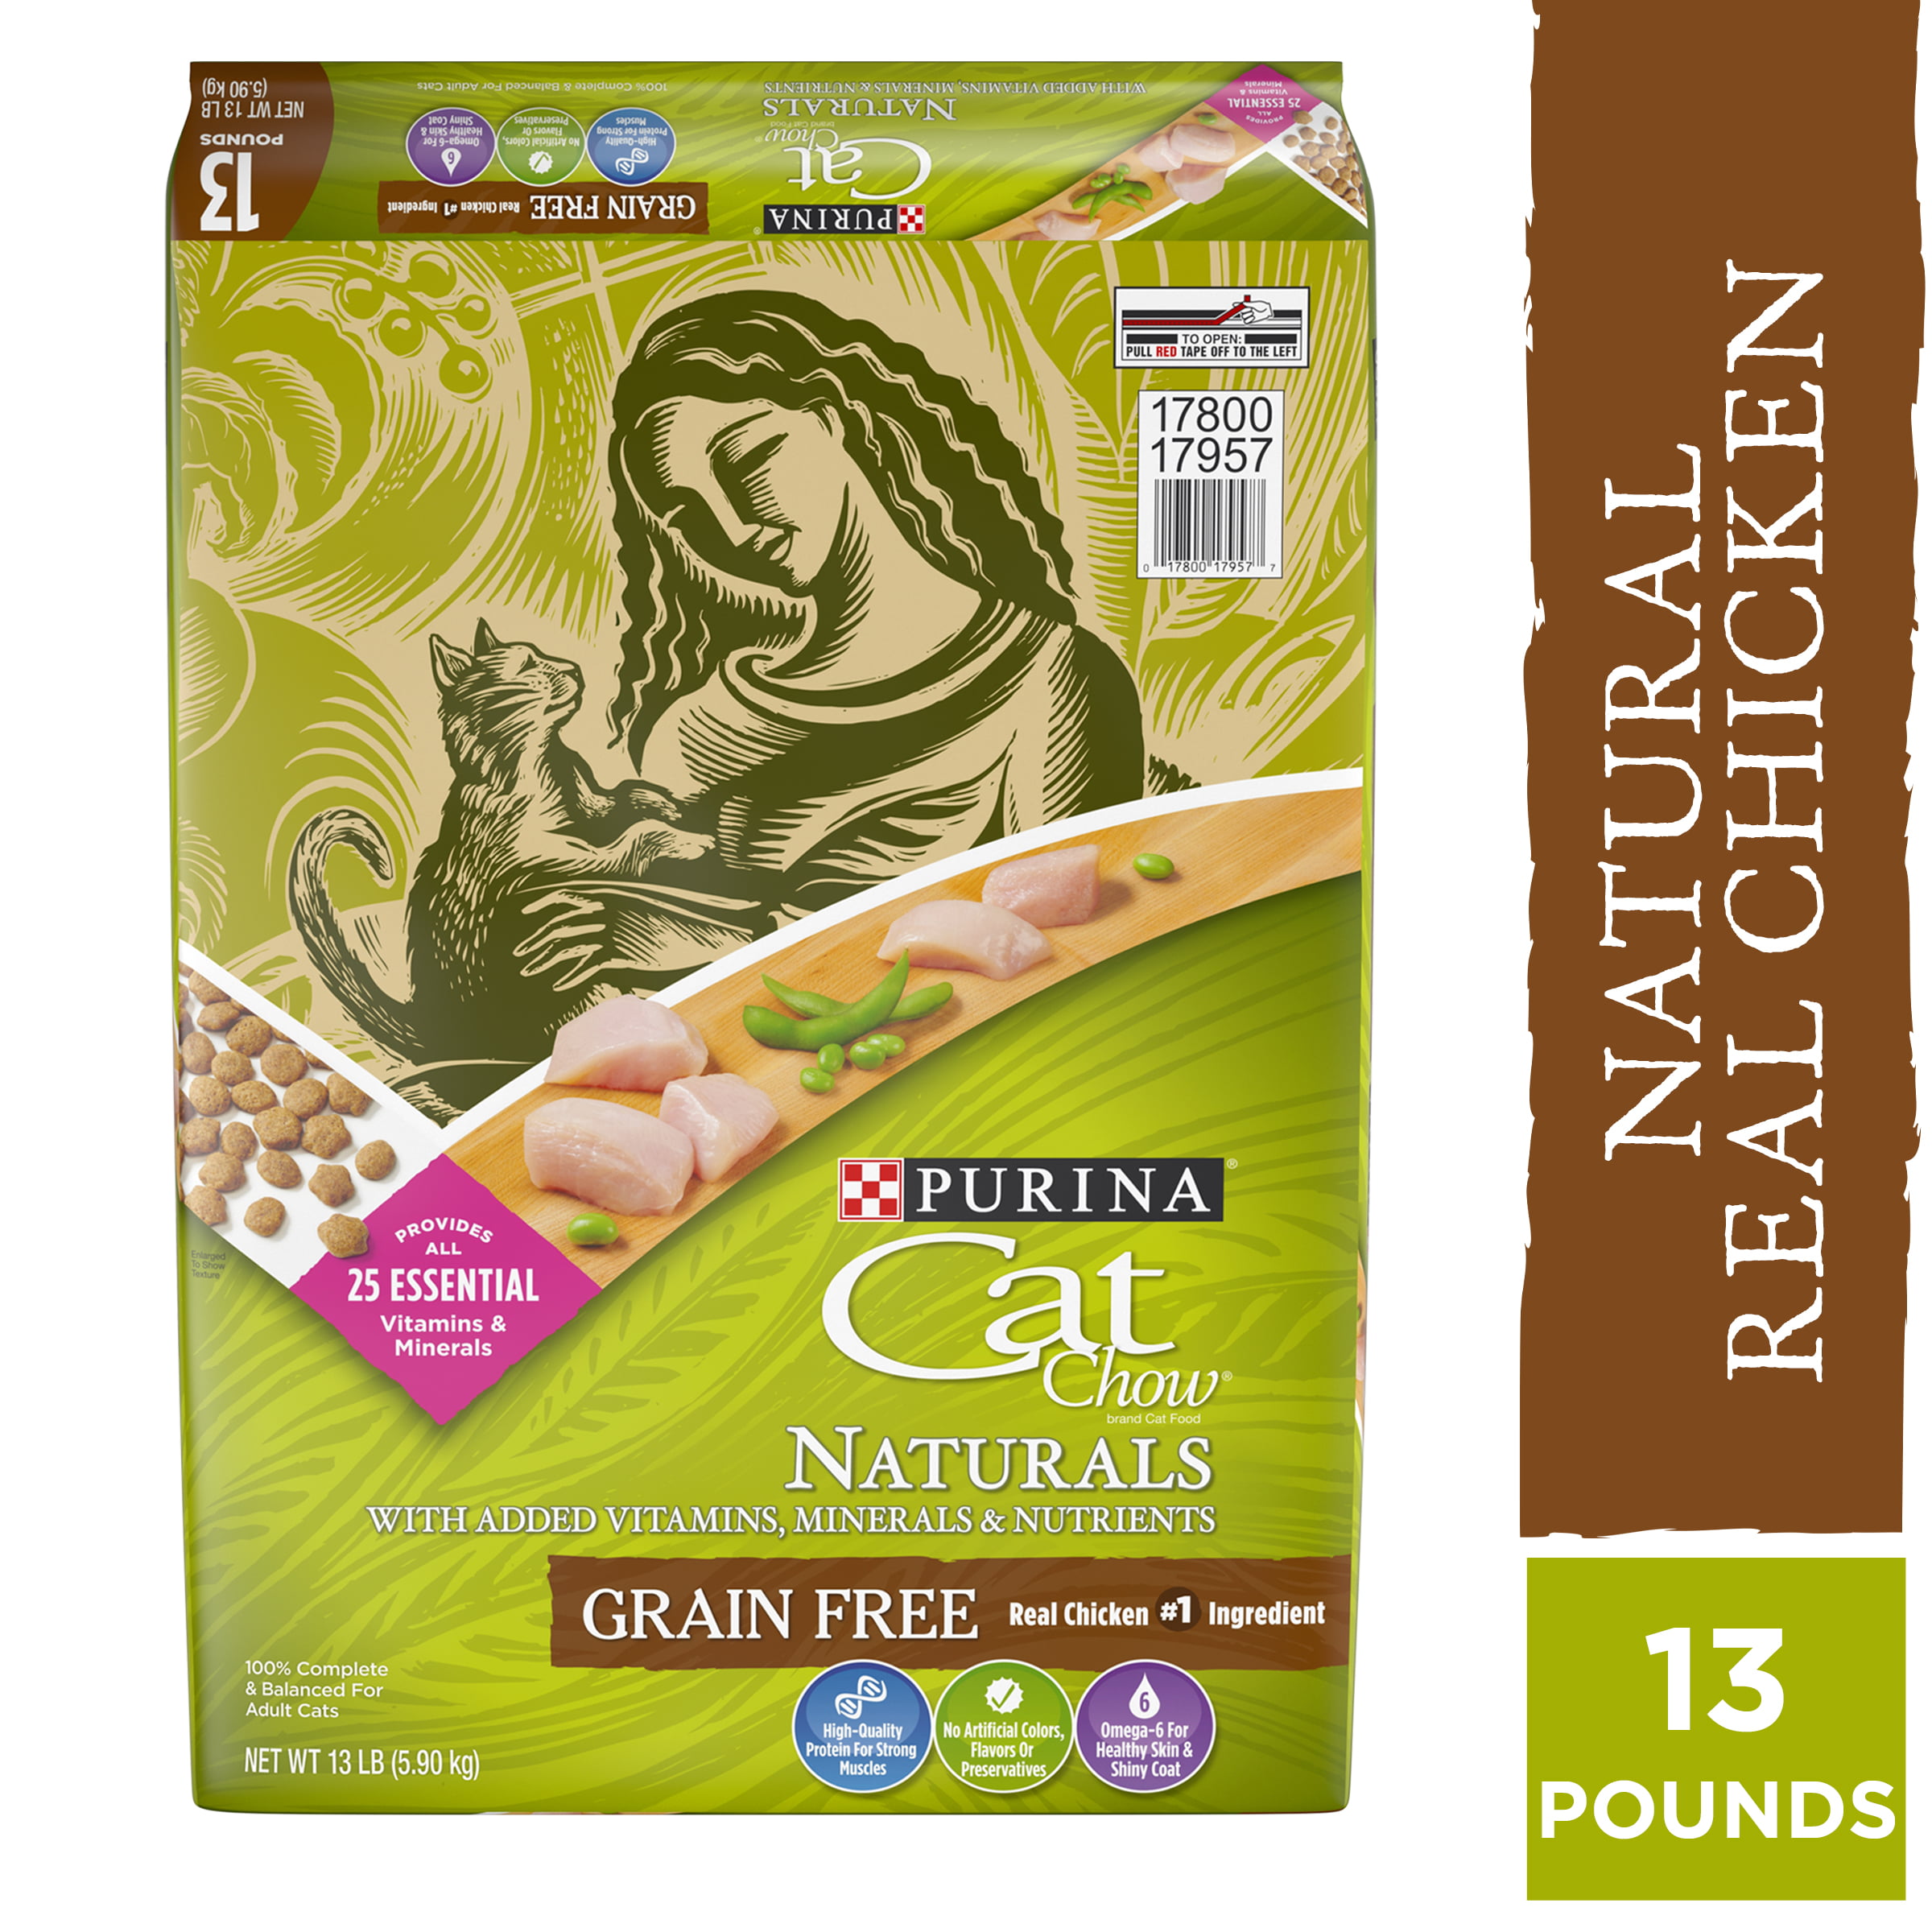 Purina Cat Chow Grain Free, Natural Dry 